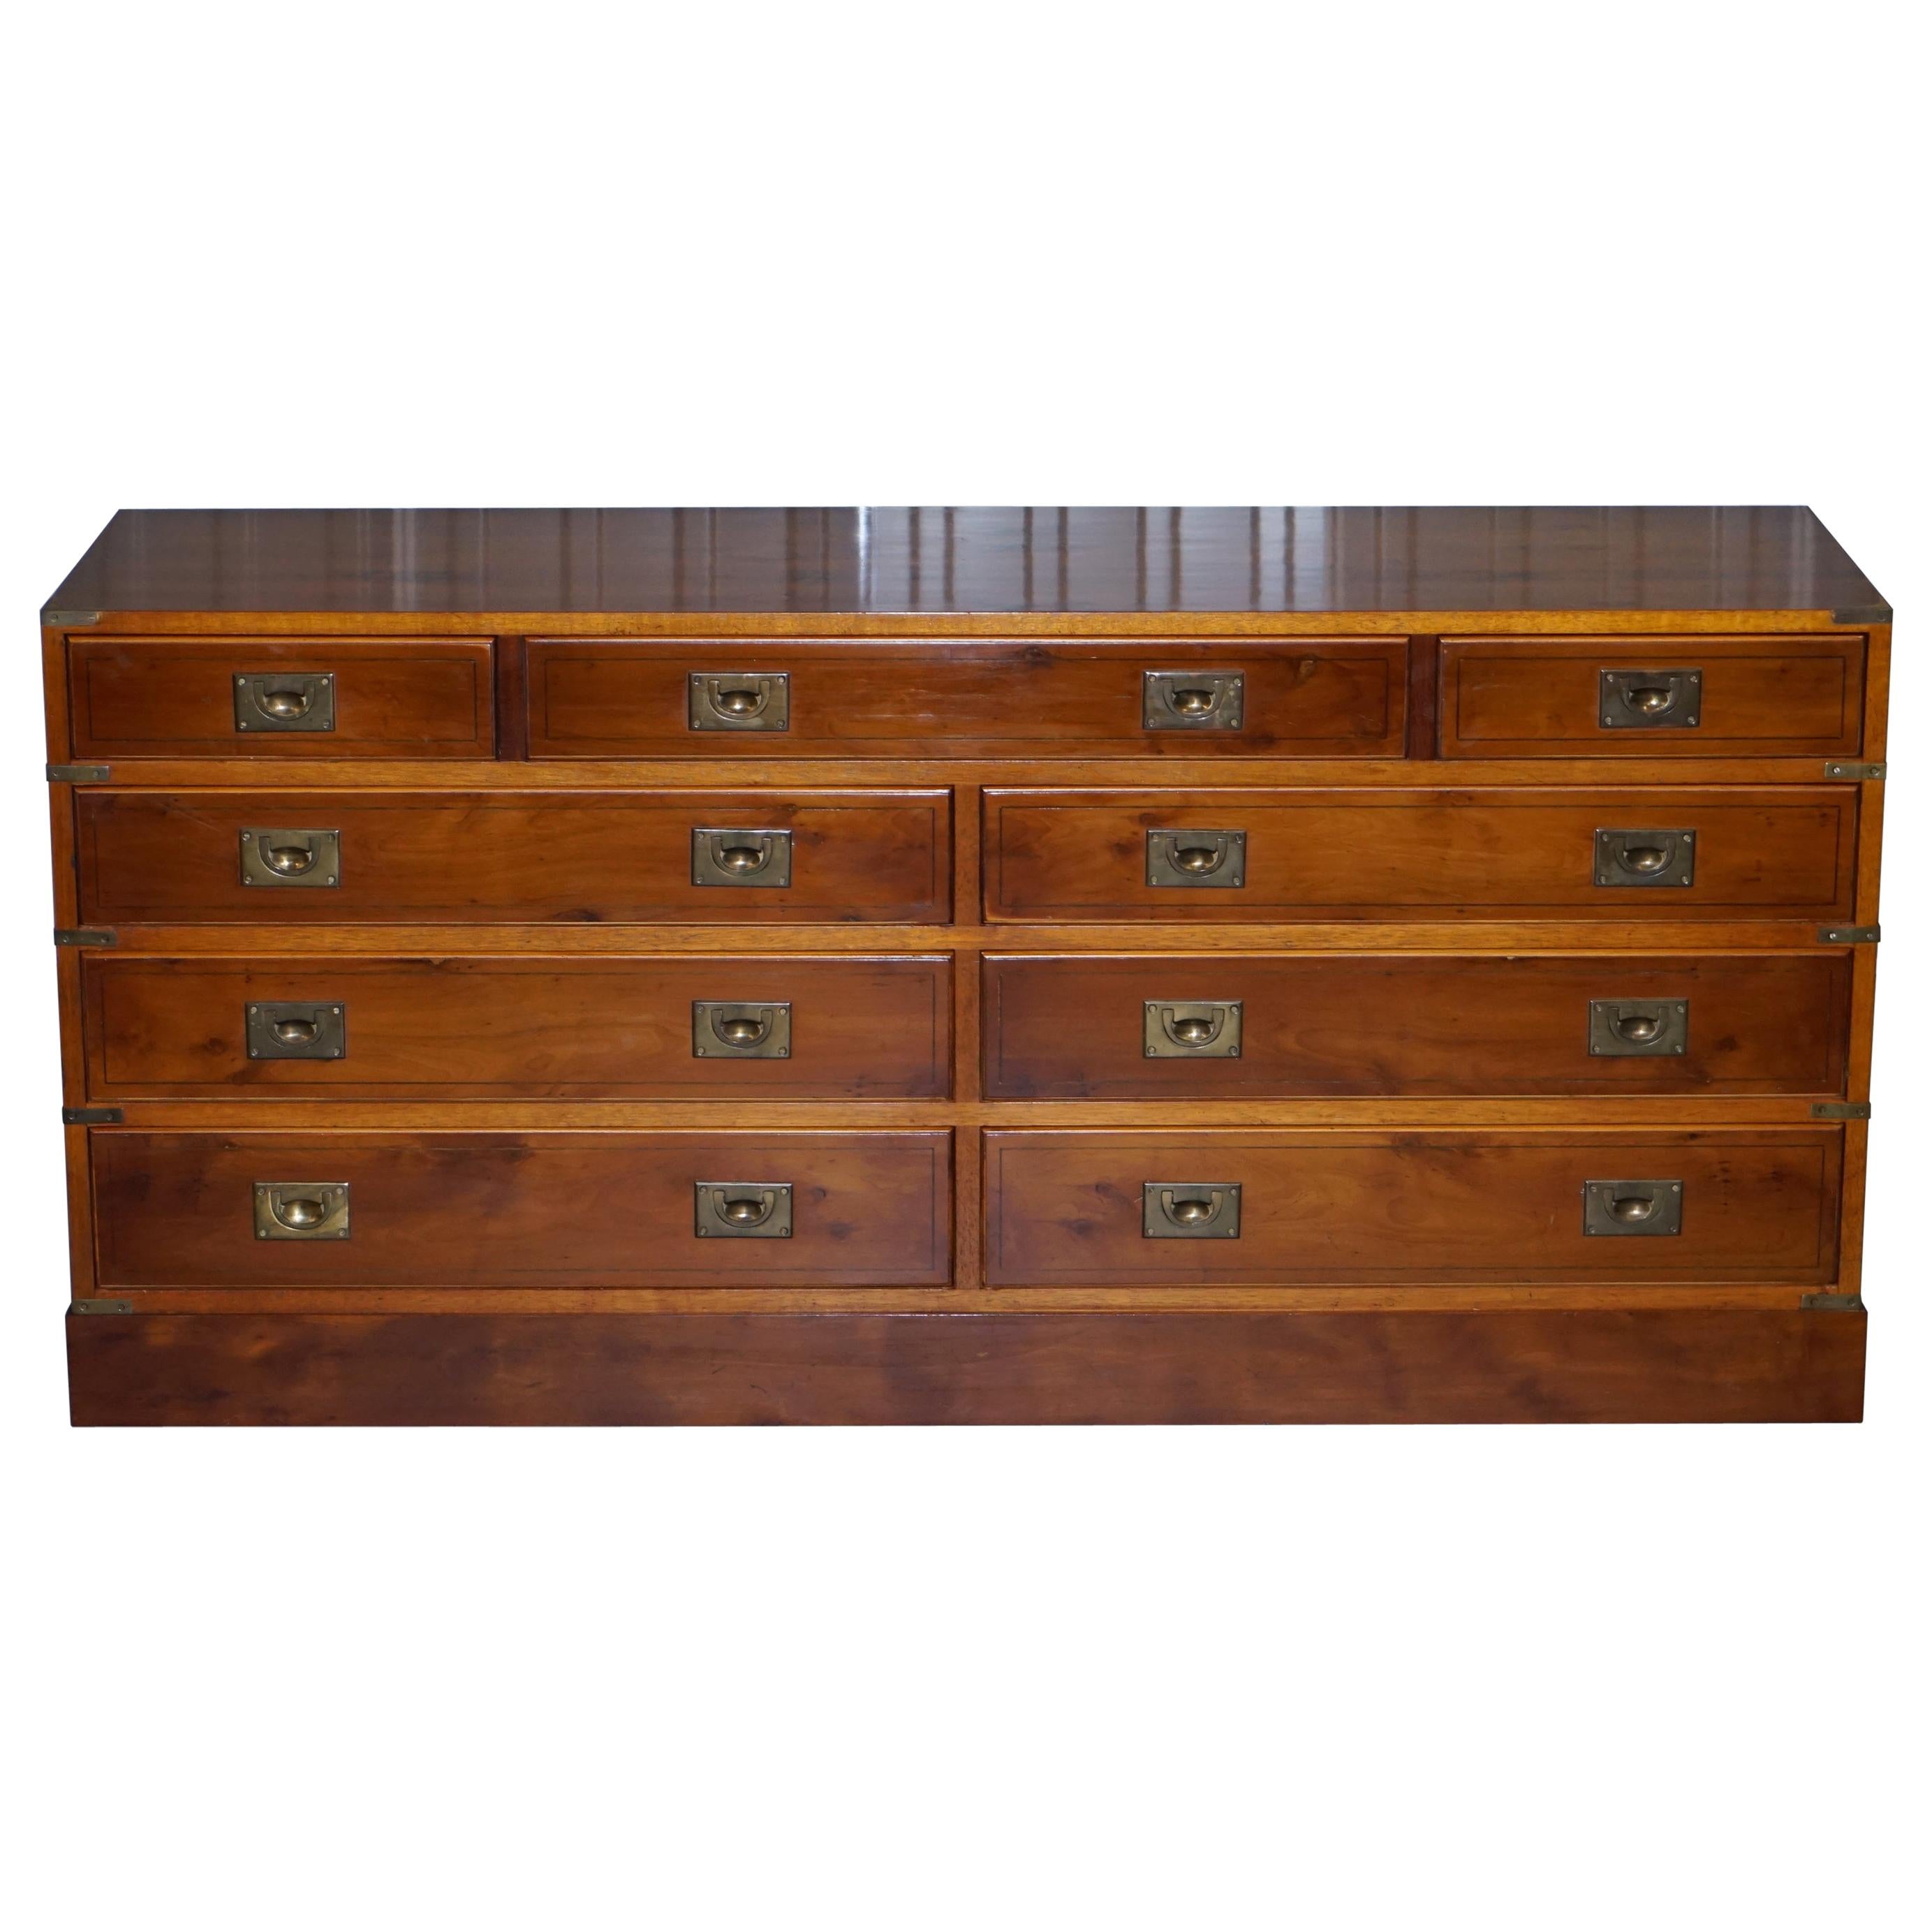 Stunning Vintage Burr Yew Wood Military Campaign Sideboard Chest of Drawers